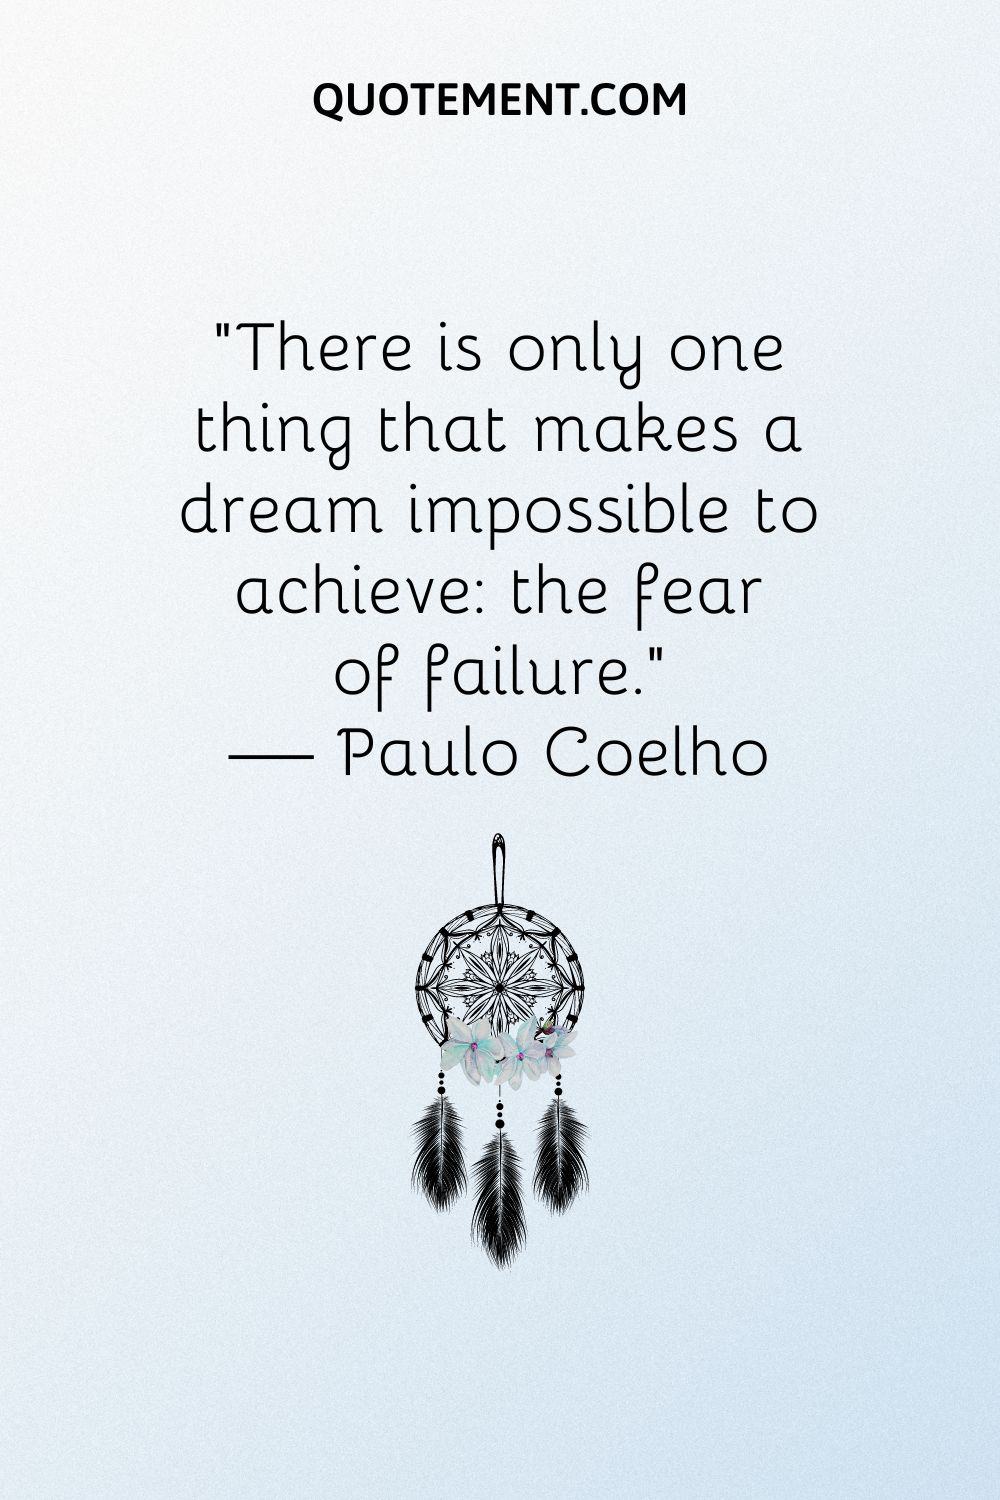 “There is only one thing that makes a dream impossible to achieve the fear of failure.” — Paulo Coelho